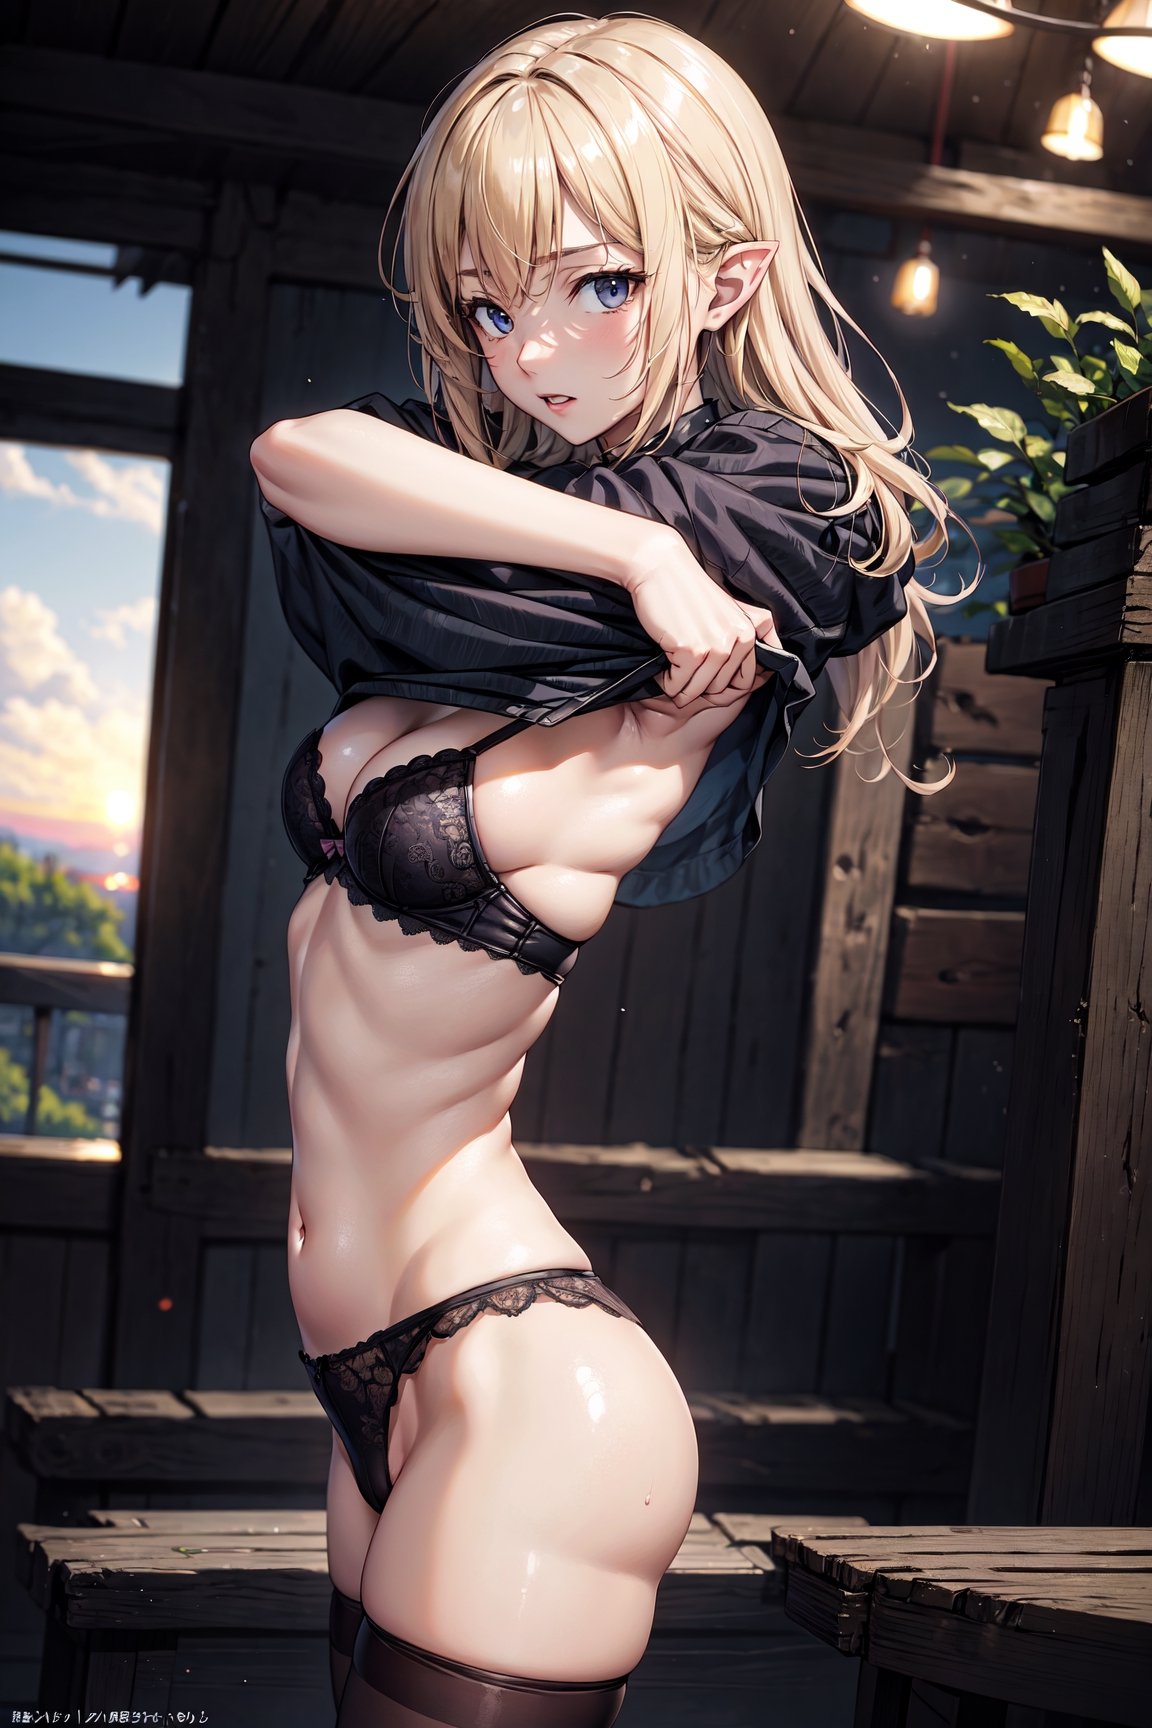 (nsfw),(4k), (masterpiece), (best quality),(extremely intricate),(cg wallpaper), (photorealism), (sharp focus), (cinematic lighting), (extremely detailed),

A naked blonde female undressing showing an embarrassed expression.

,undressing,cute dog,thighhighs,frilled bra,pointy ears
,kaede,sciamano240,

somptuous composition by Russ Mills, Tsutomu Nihei and Yoji Shinkawa.

asian girl,FFIXBG,

Intricate ruins background with oak trees,bushes,fauna,flowers,clouds,sunset,perfect,undressing,undressing top,hand,YAMATO